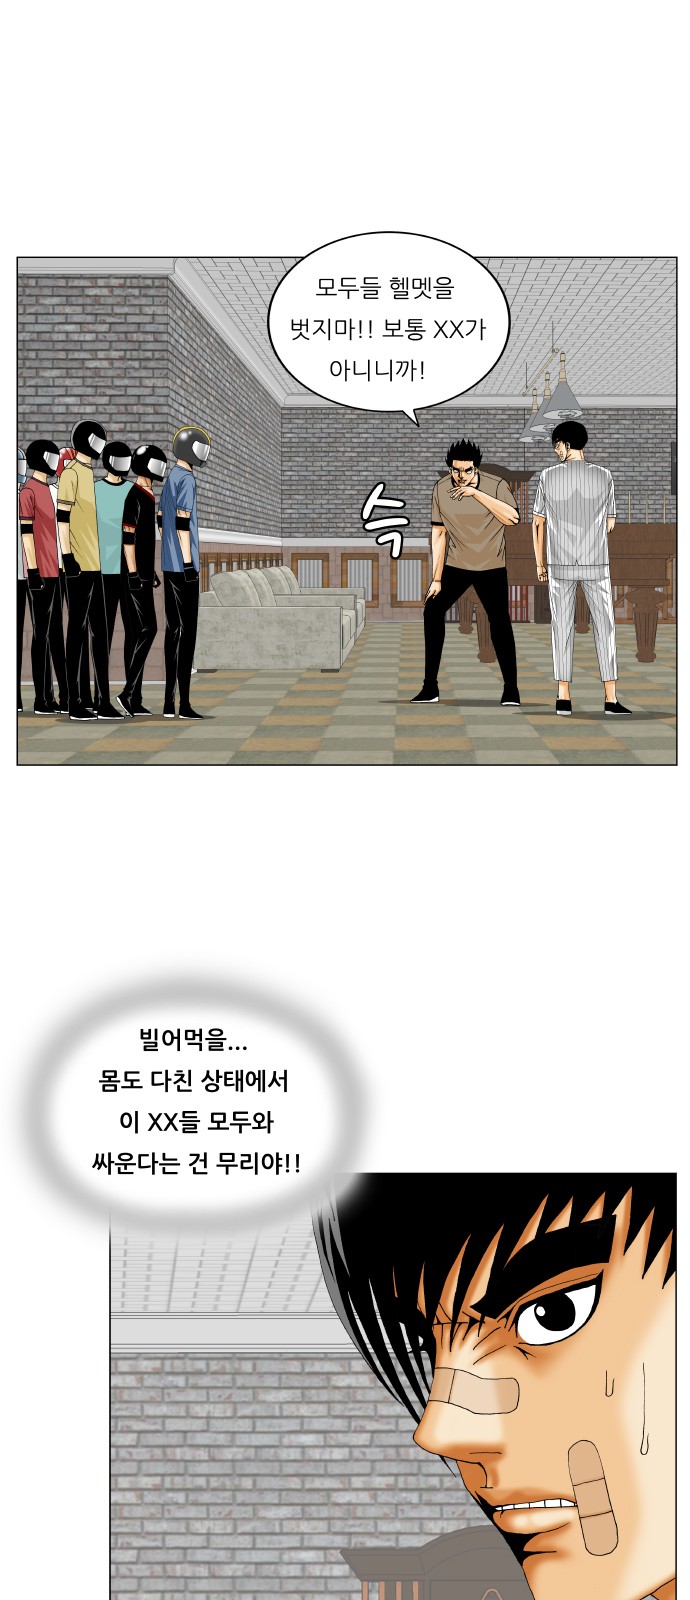 Ultimate Legend - Kang Hae Hyo - Chapter 233 - Page 5